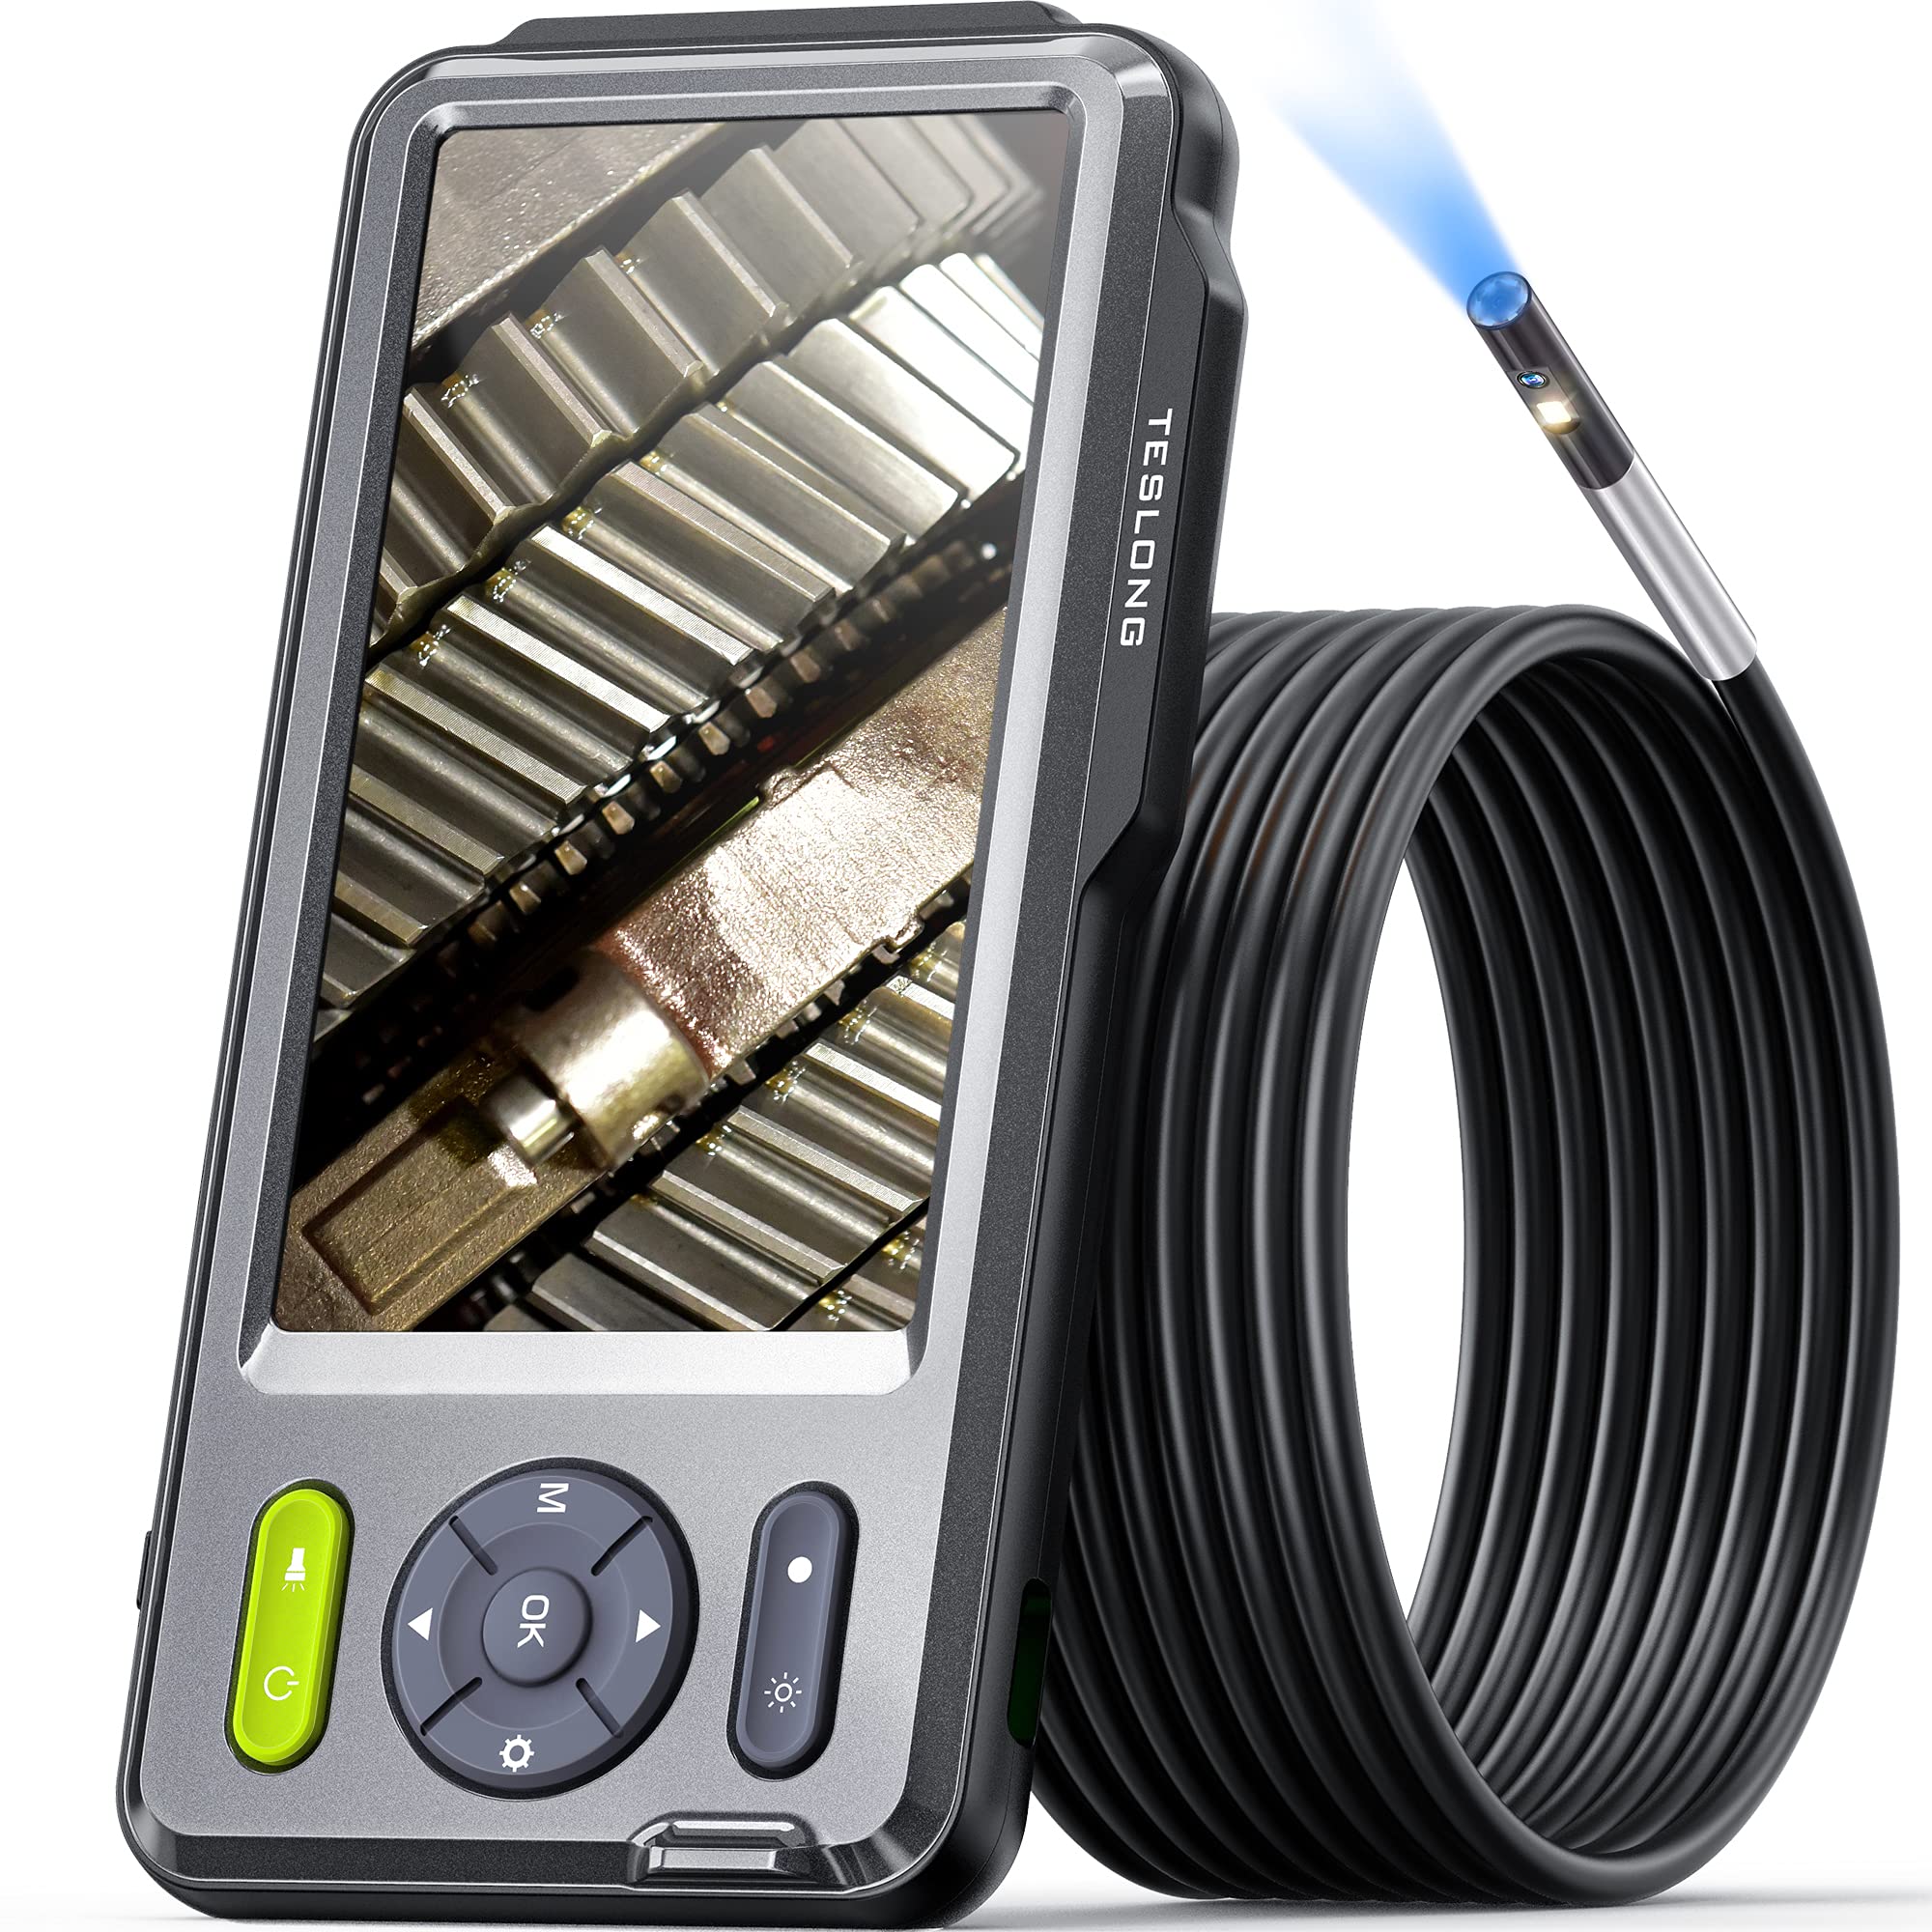 Teslong 5mm Dual Lens Inspection Camera, Teslong Borescope with LED Light, HD Industrial Endoscope, 5" IPS Screen, Waterproof Video Scop